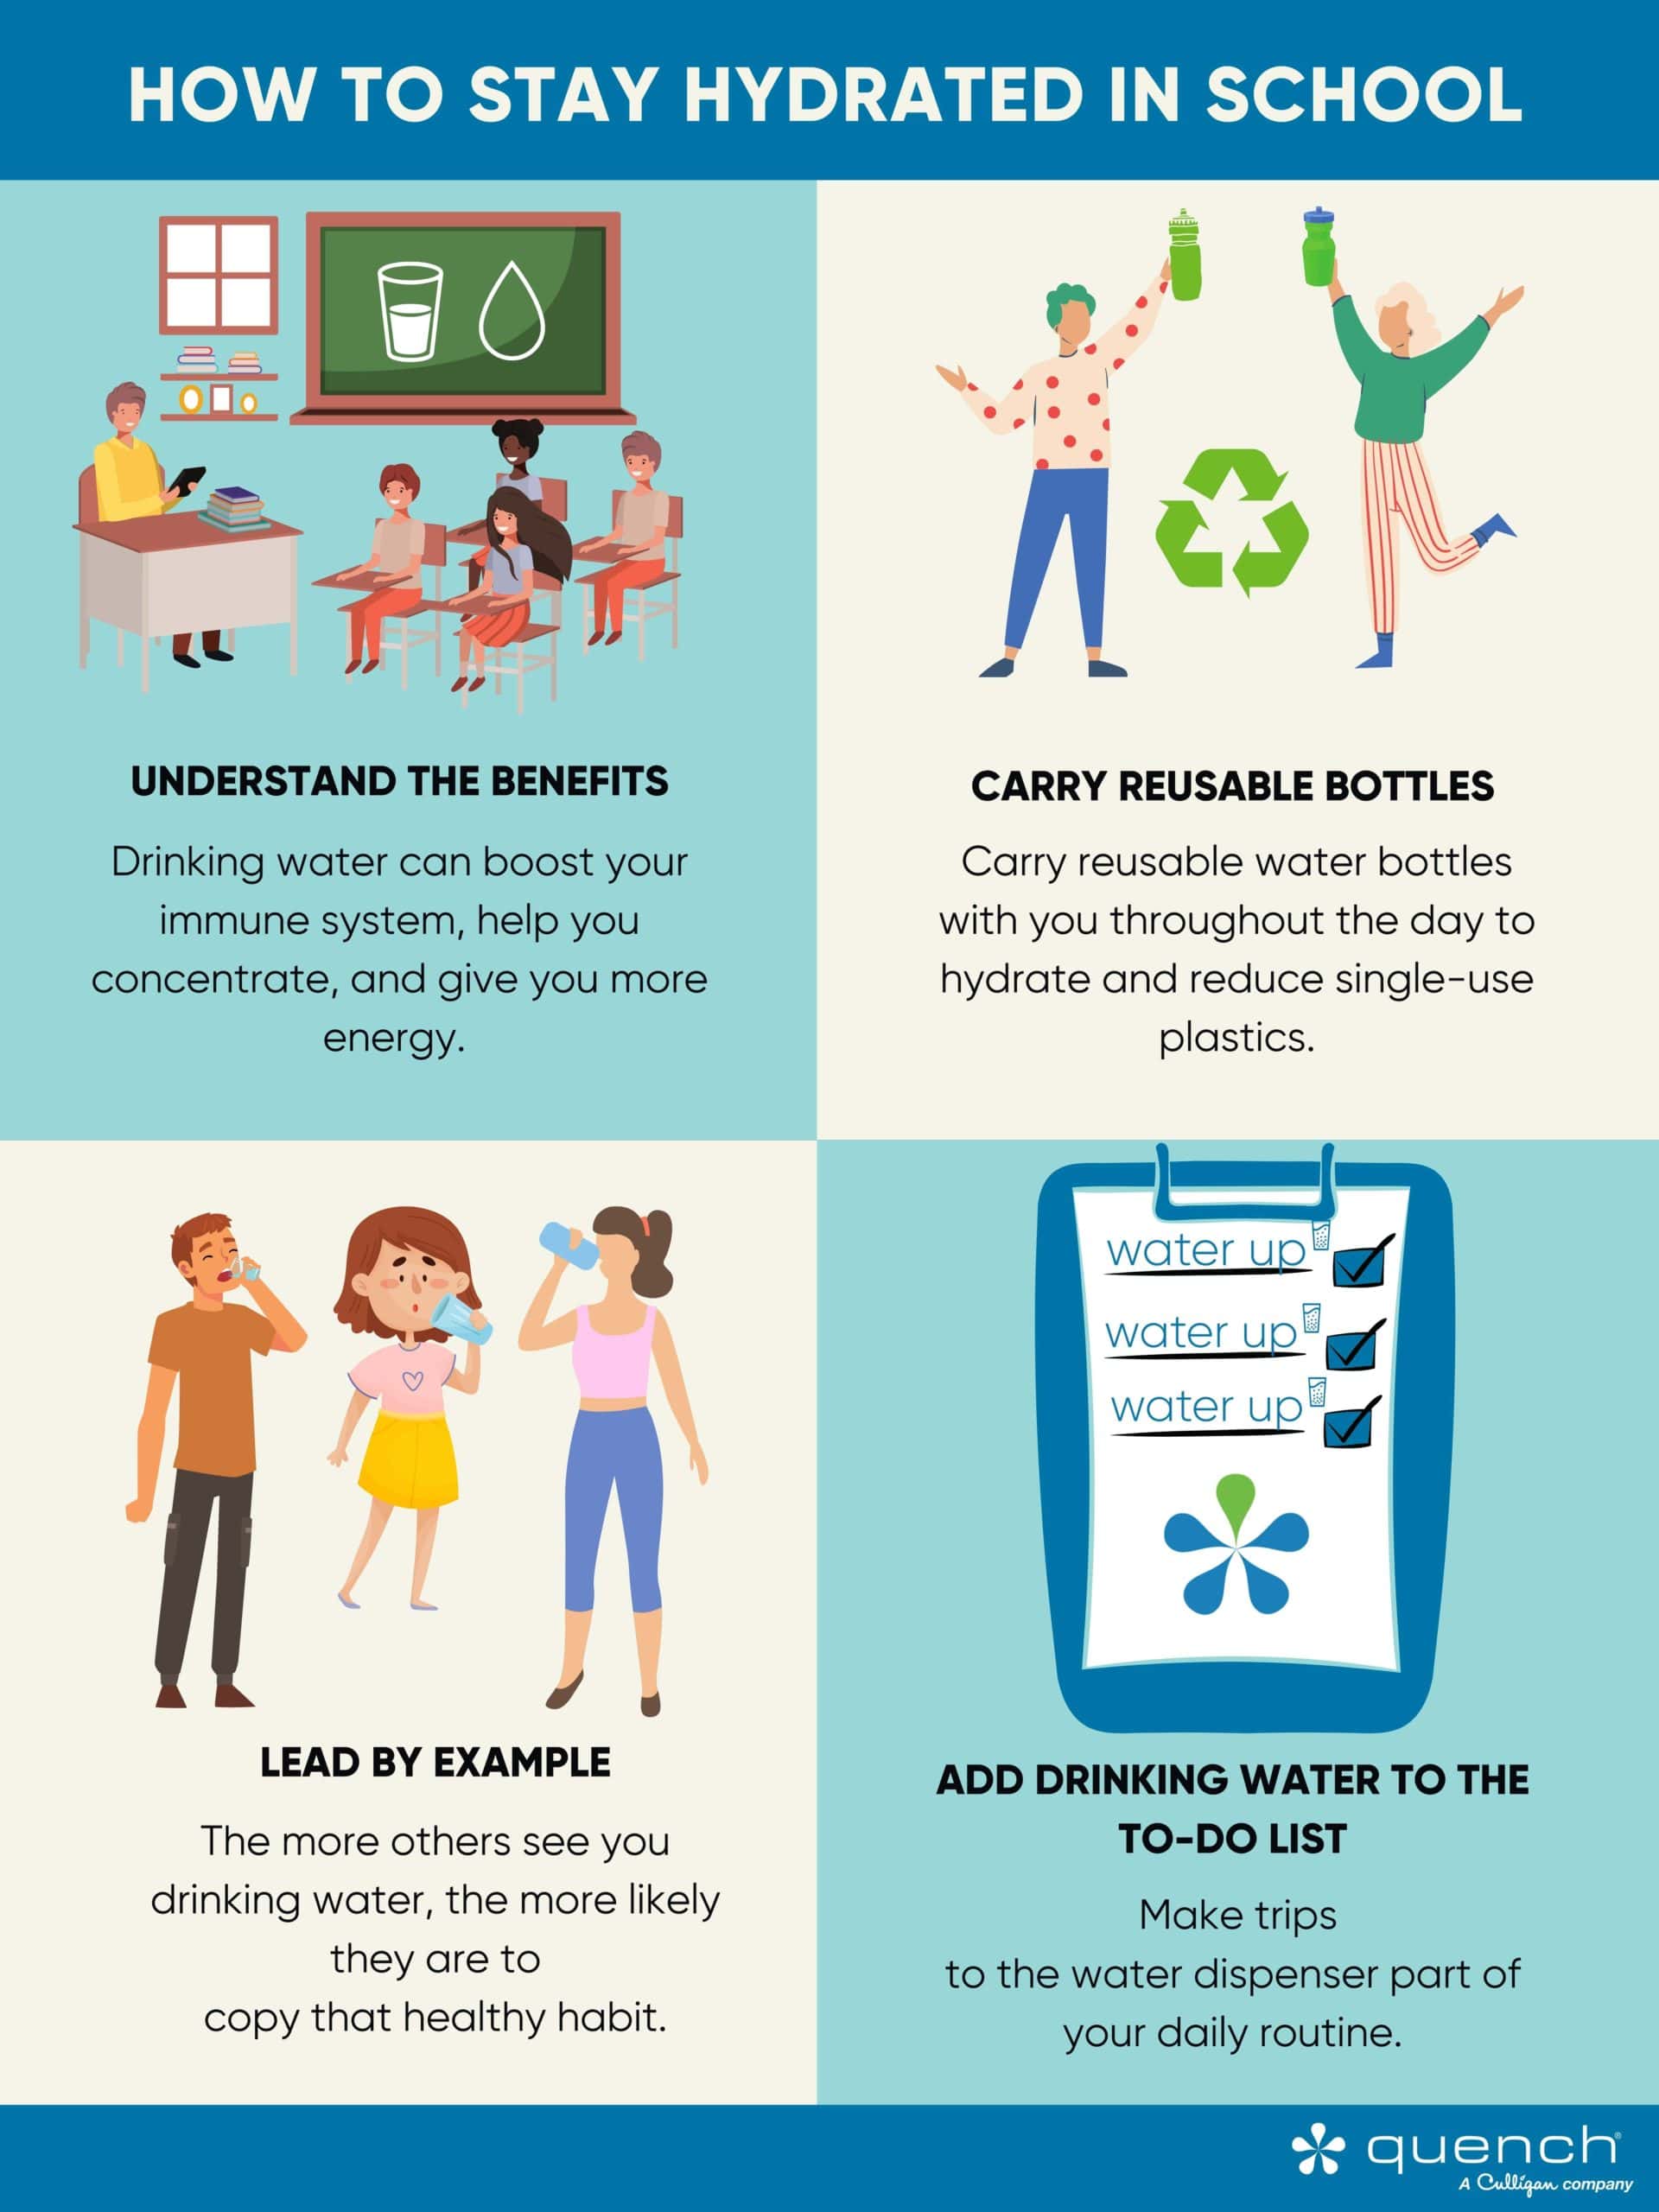 Staying Hydrated: The Importance Of Water For Active Kids